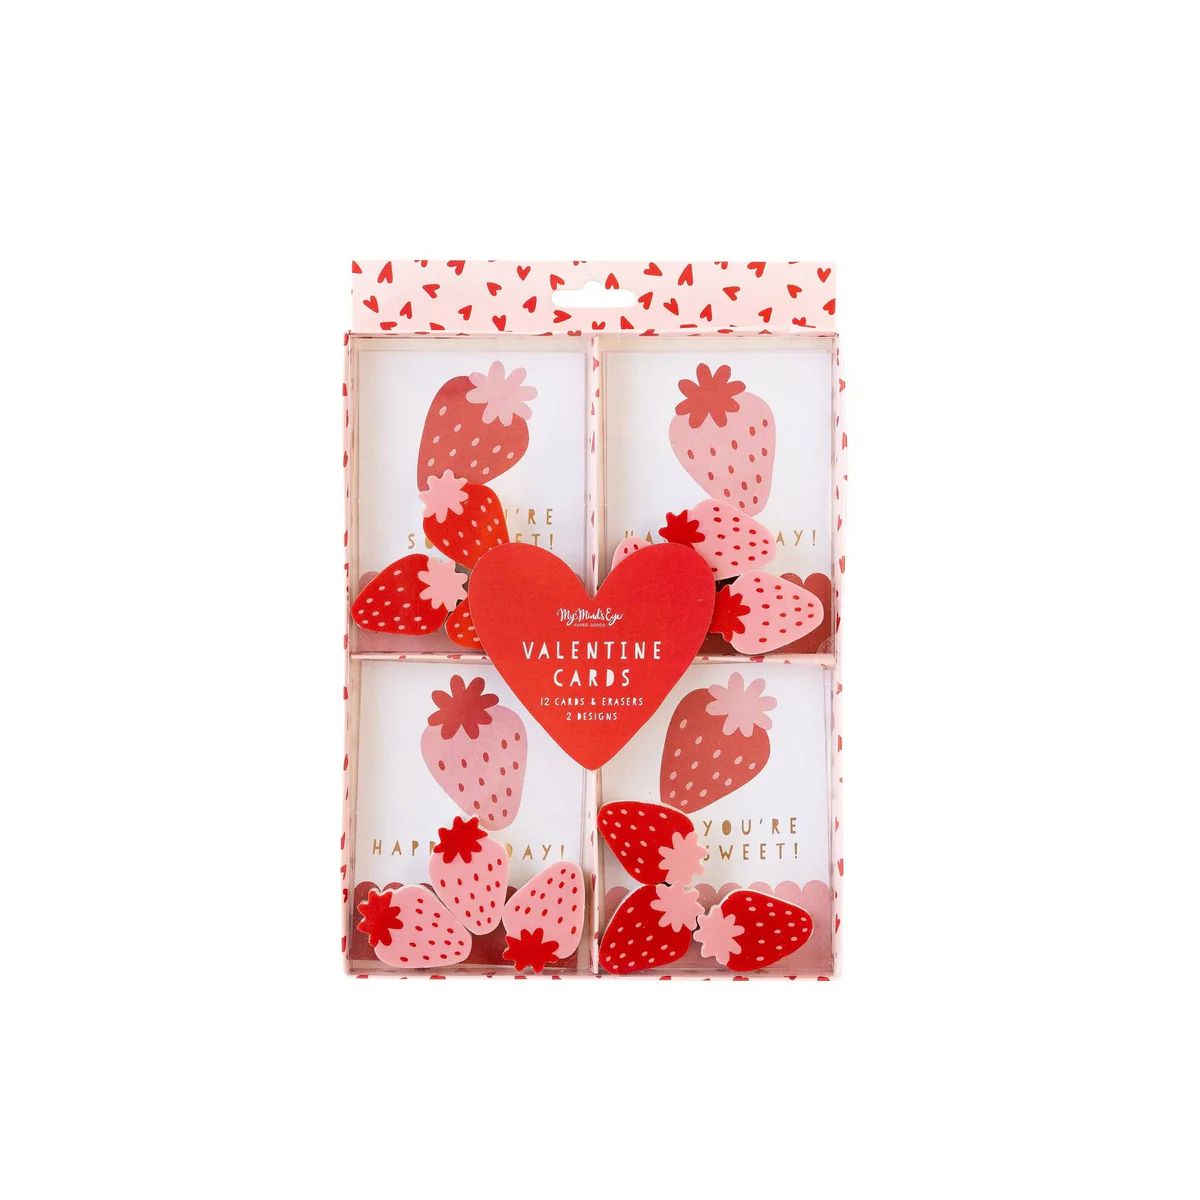 Strawberries and Hearts Valentine's Cards | Pretty Day